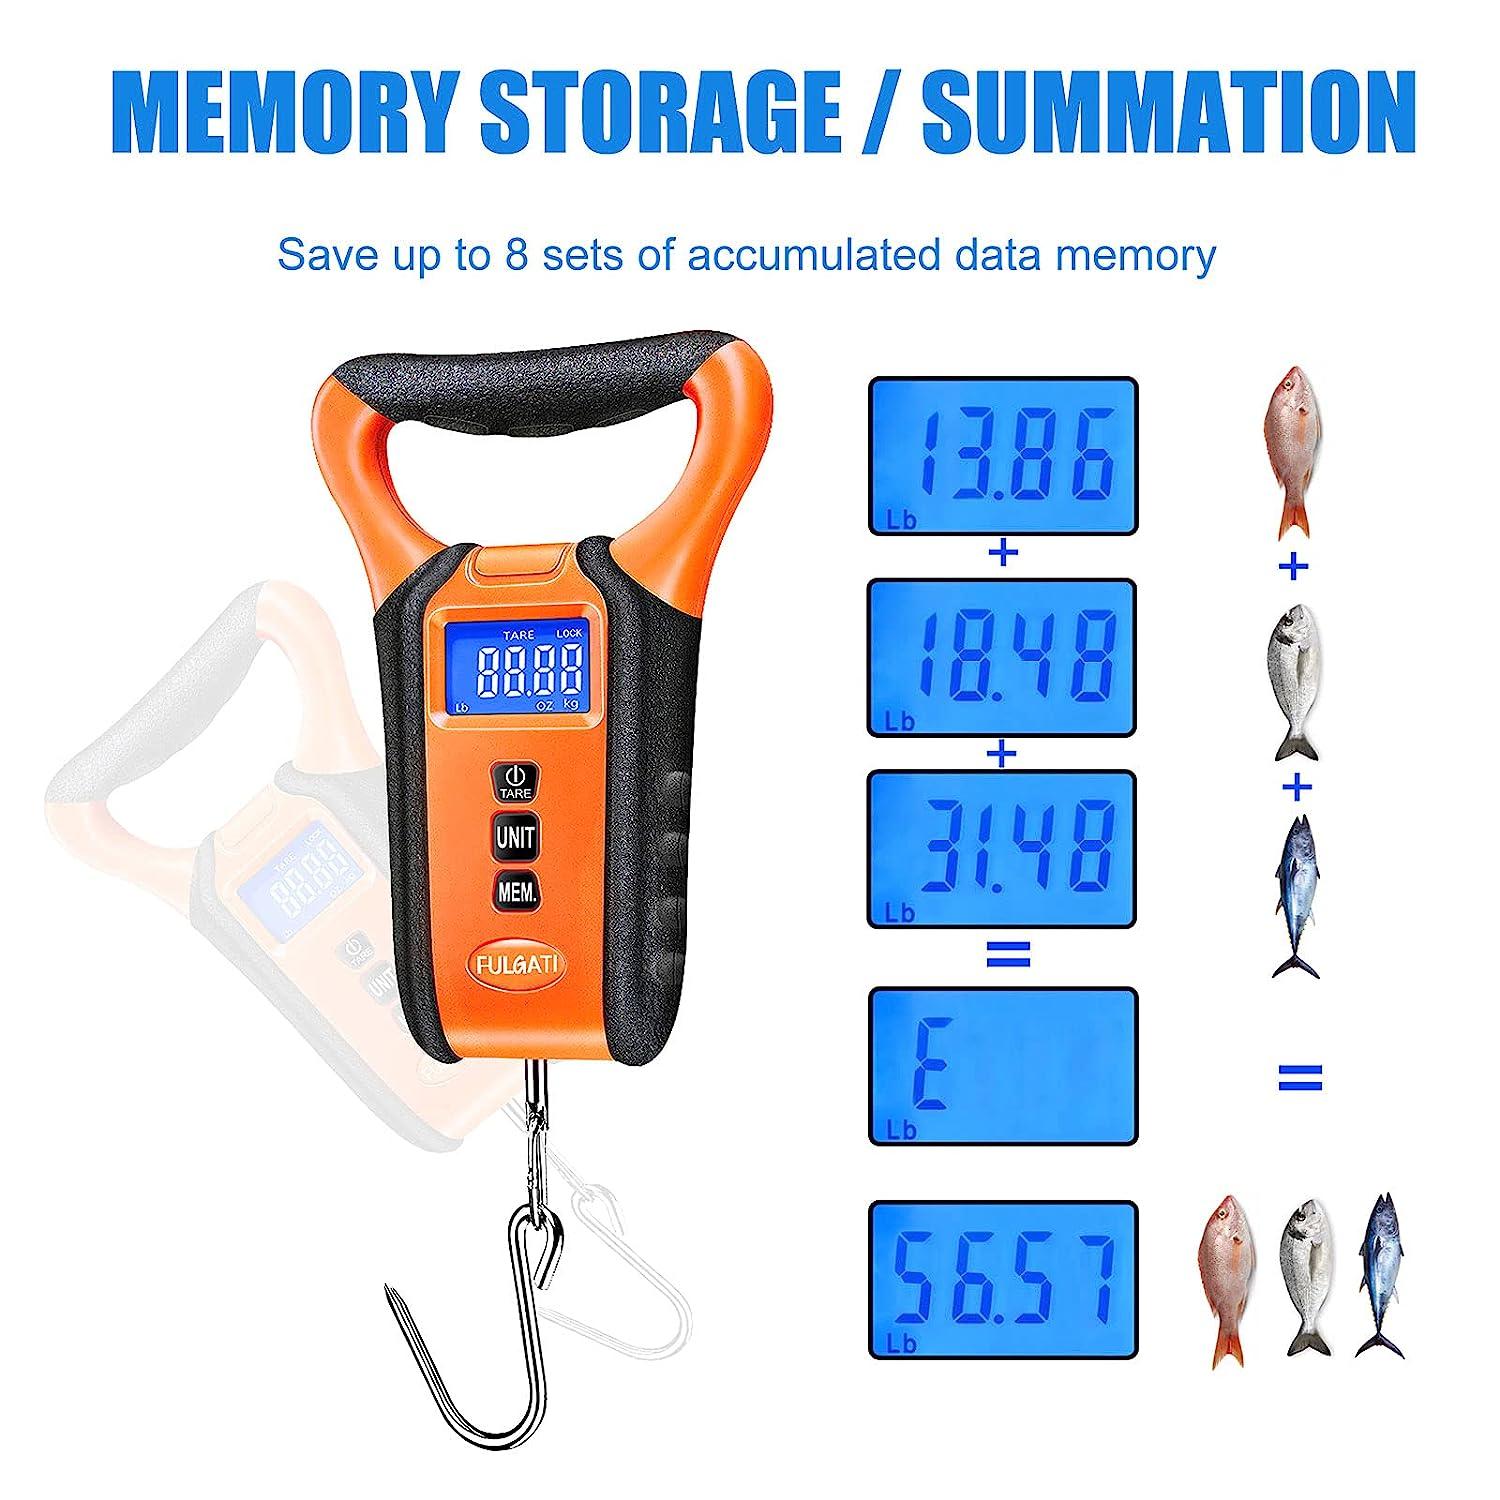 Waterproof Fish Scale Floating Fishing Scale with Lip Gripper, Fish Weighing  Scales with Backlit LCD Display 110lb/50kg, Memory Storage & Summation One  Carry Bag Include-Fishing Gifts for Men